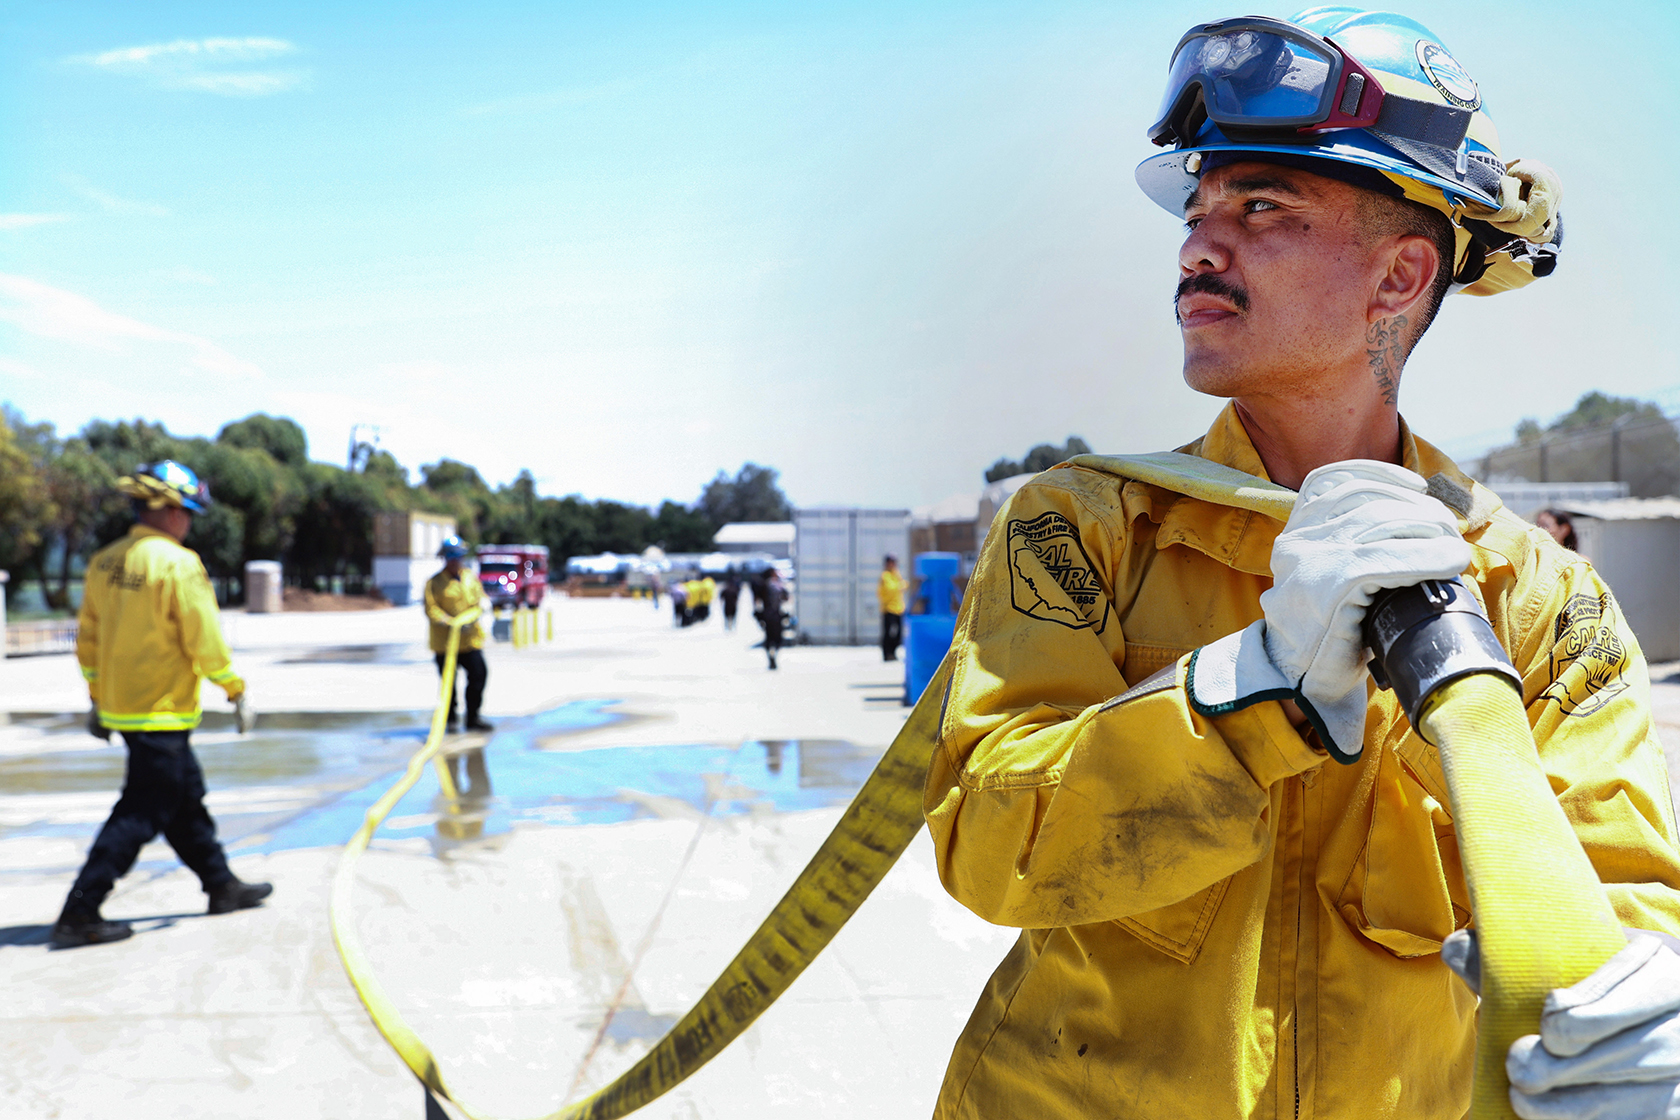 Person in uniform in foreground holding fire hose